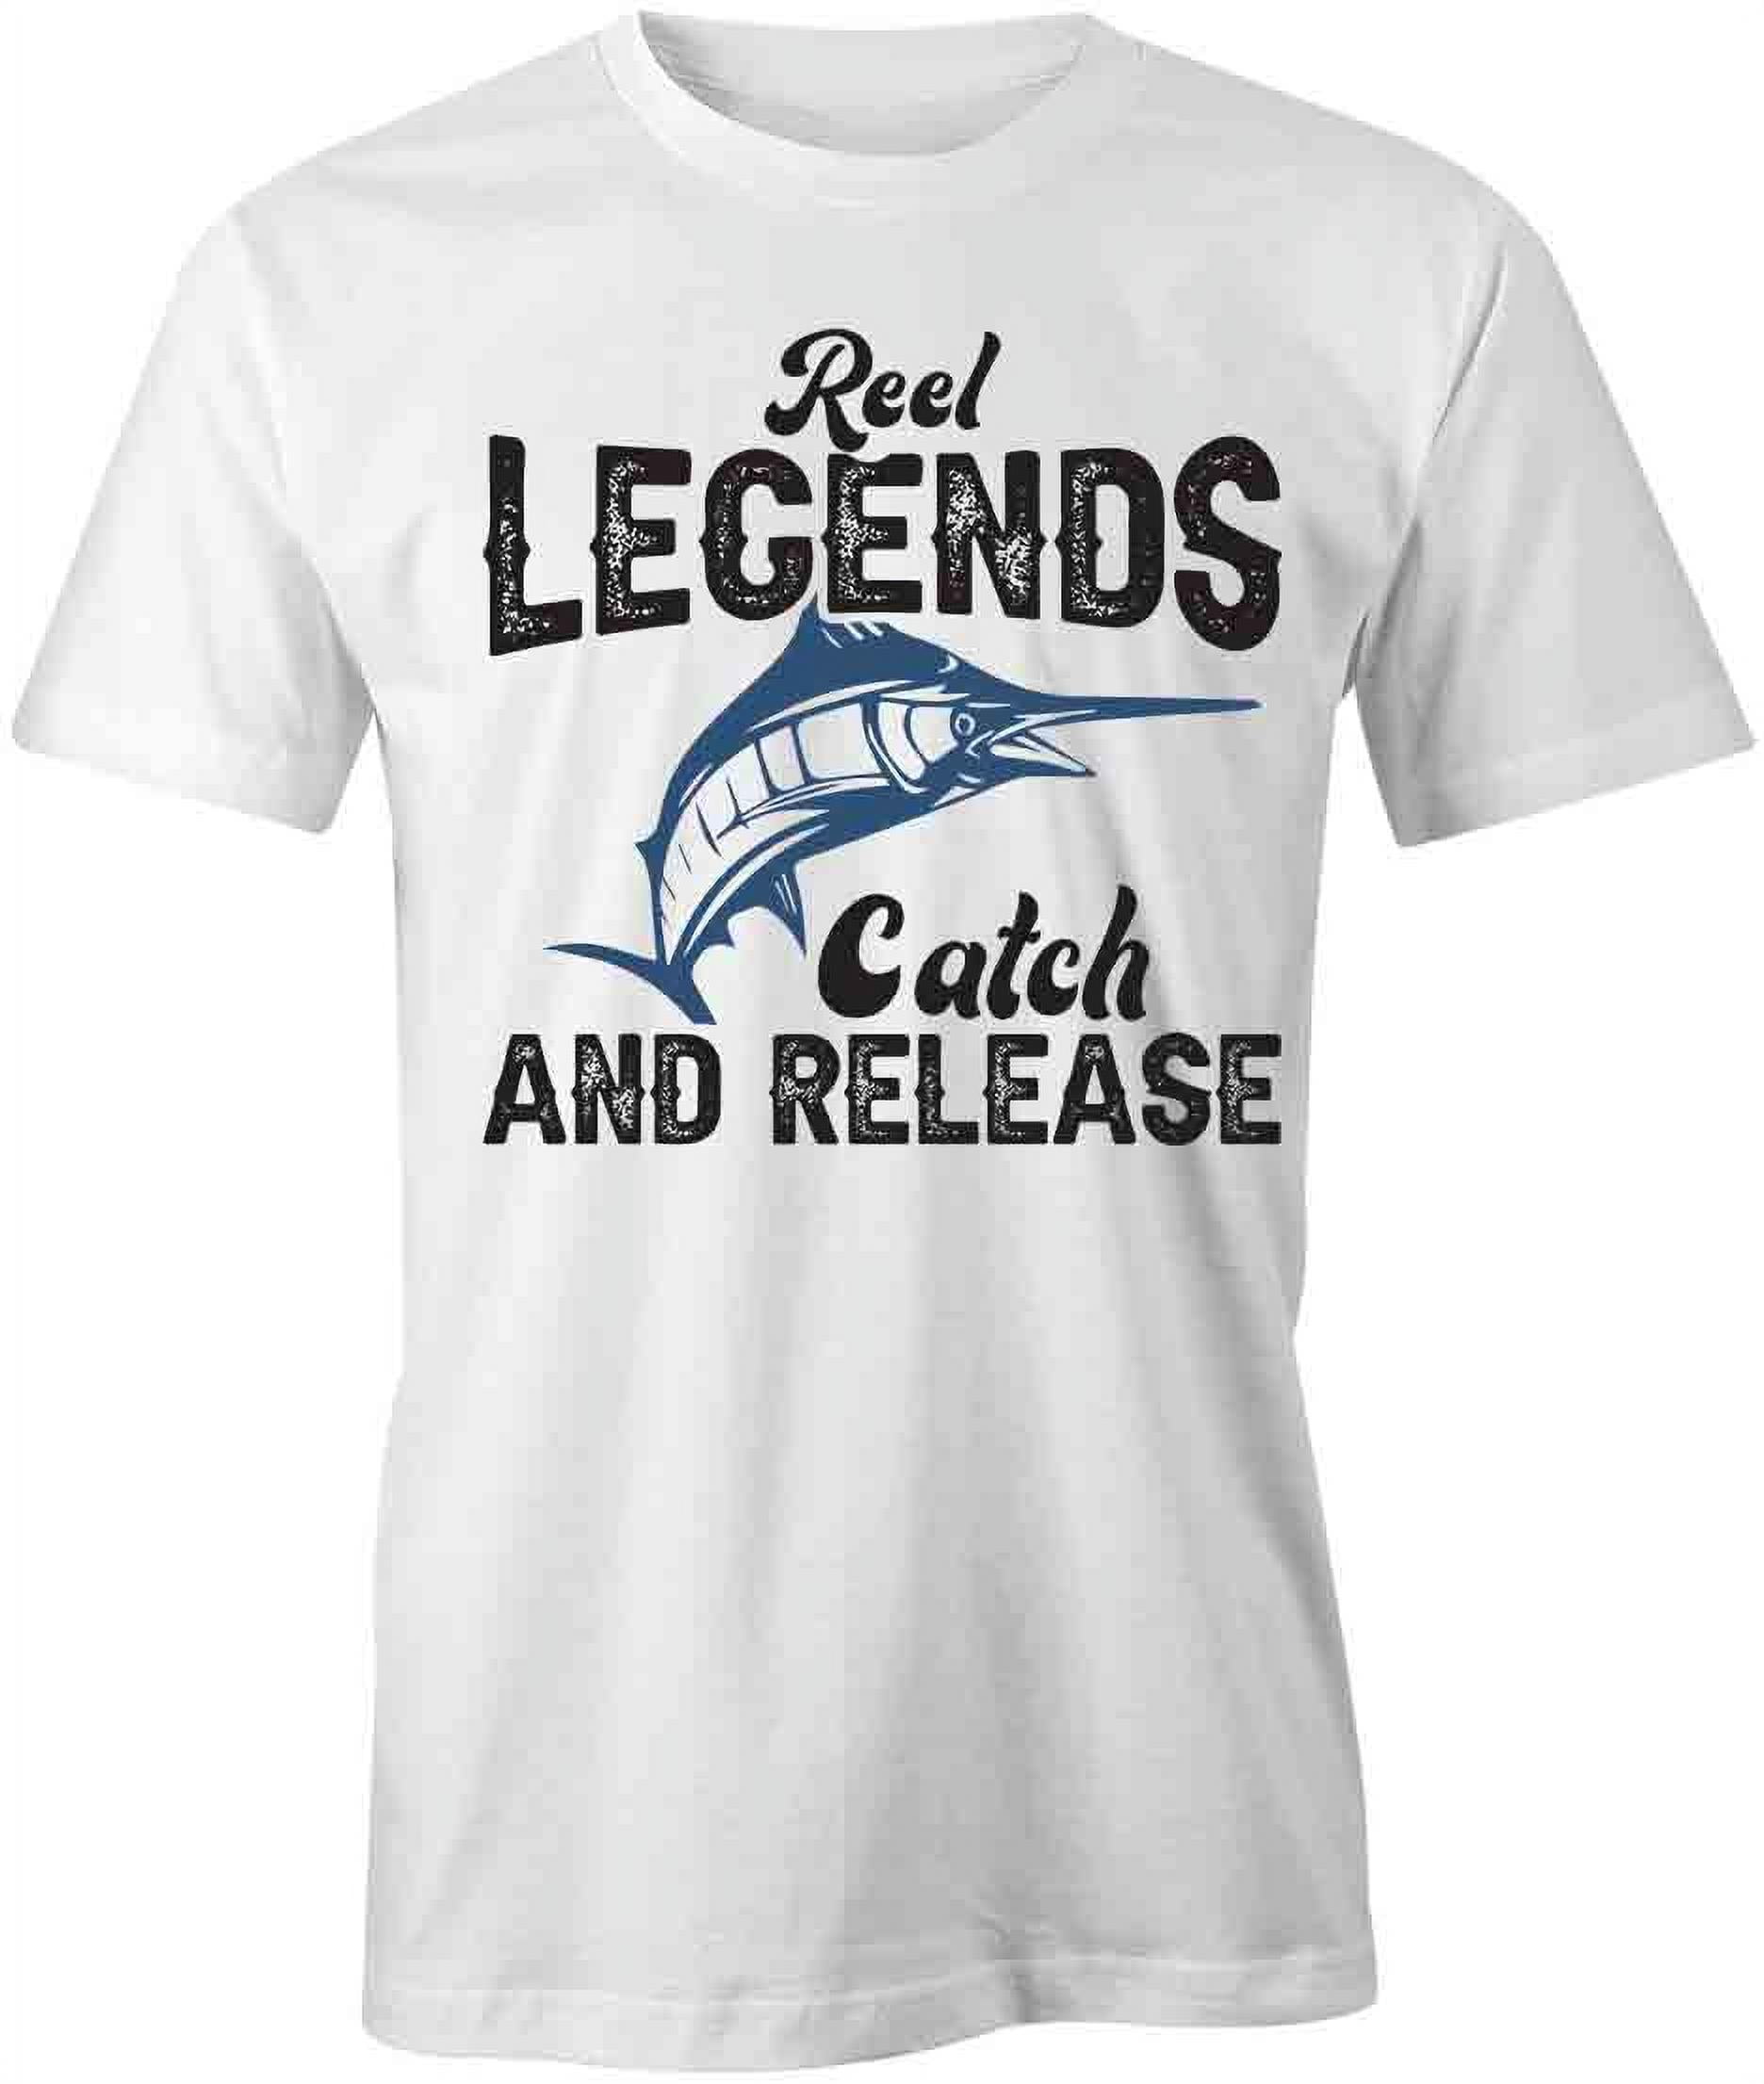 Reel Legends Catch and Release T-Shirt | Manly Hobbies White Tee Gift